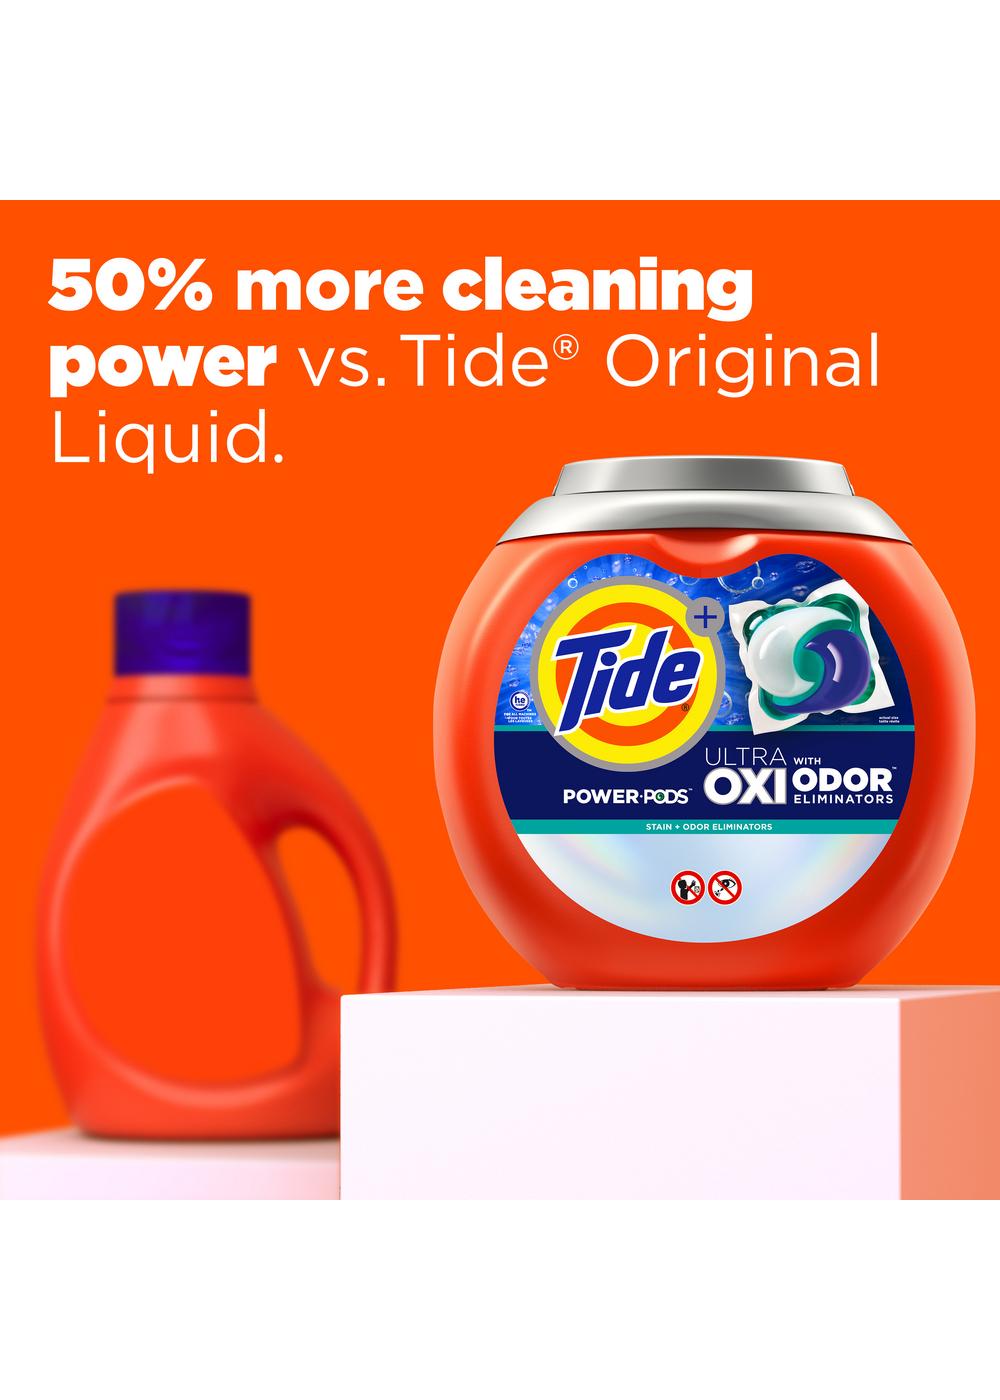 Tide Power PODS Ultra Oxi HE Laundry Detergent; image 8 of 8